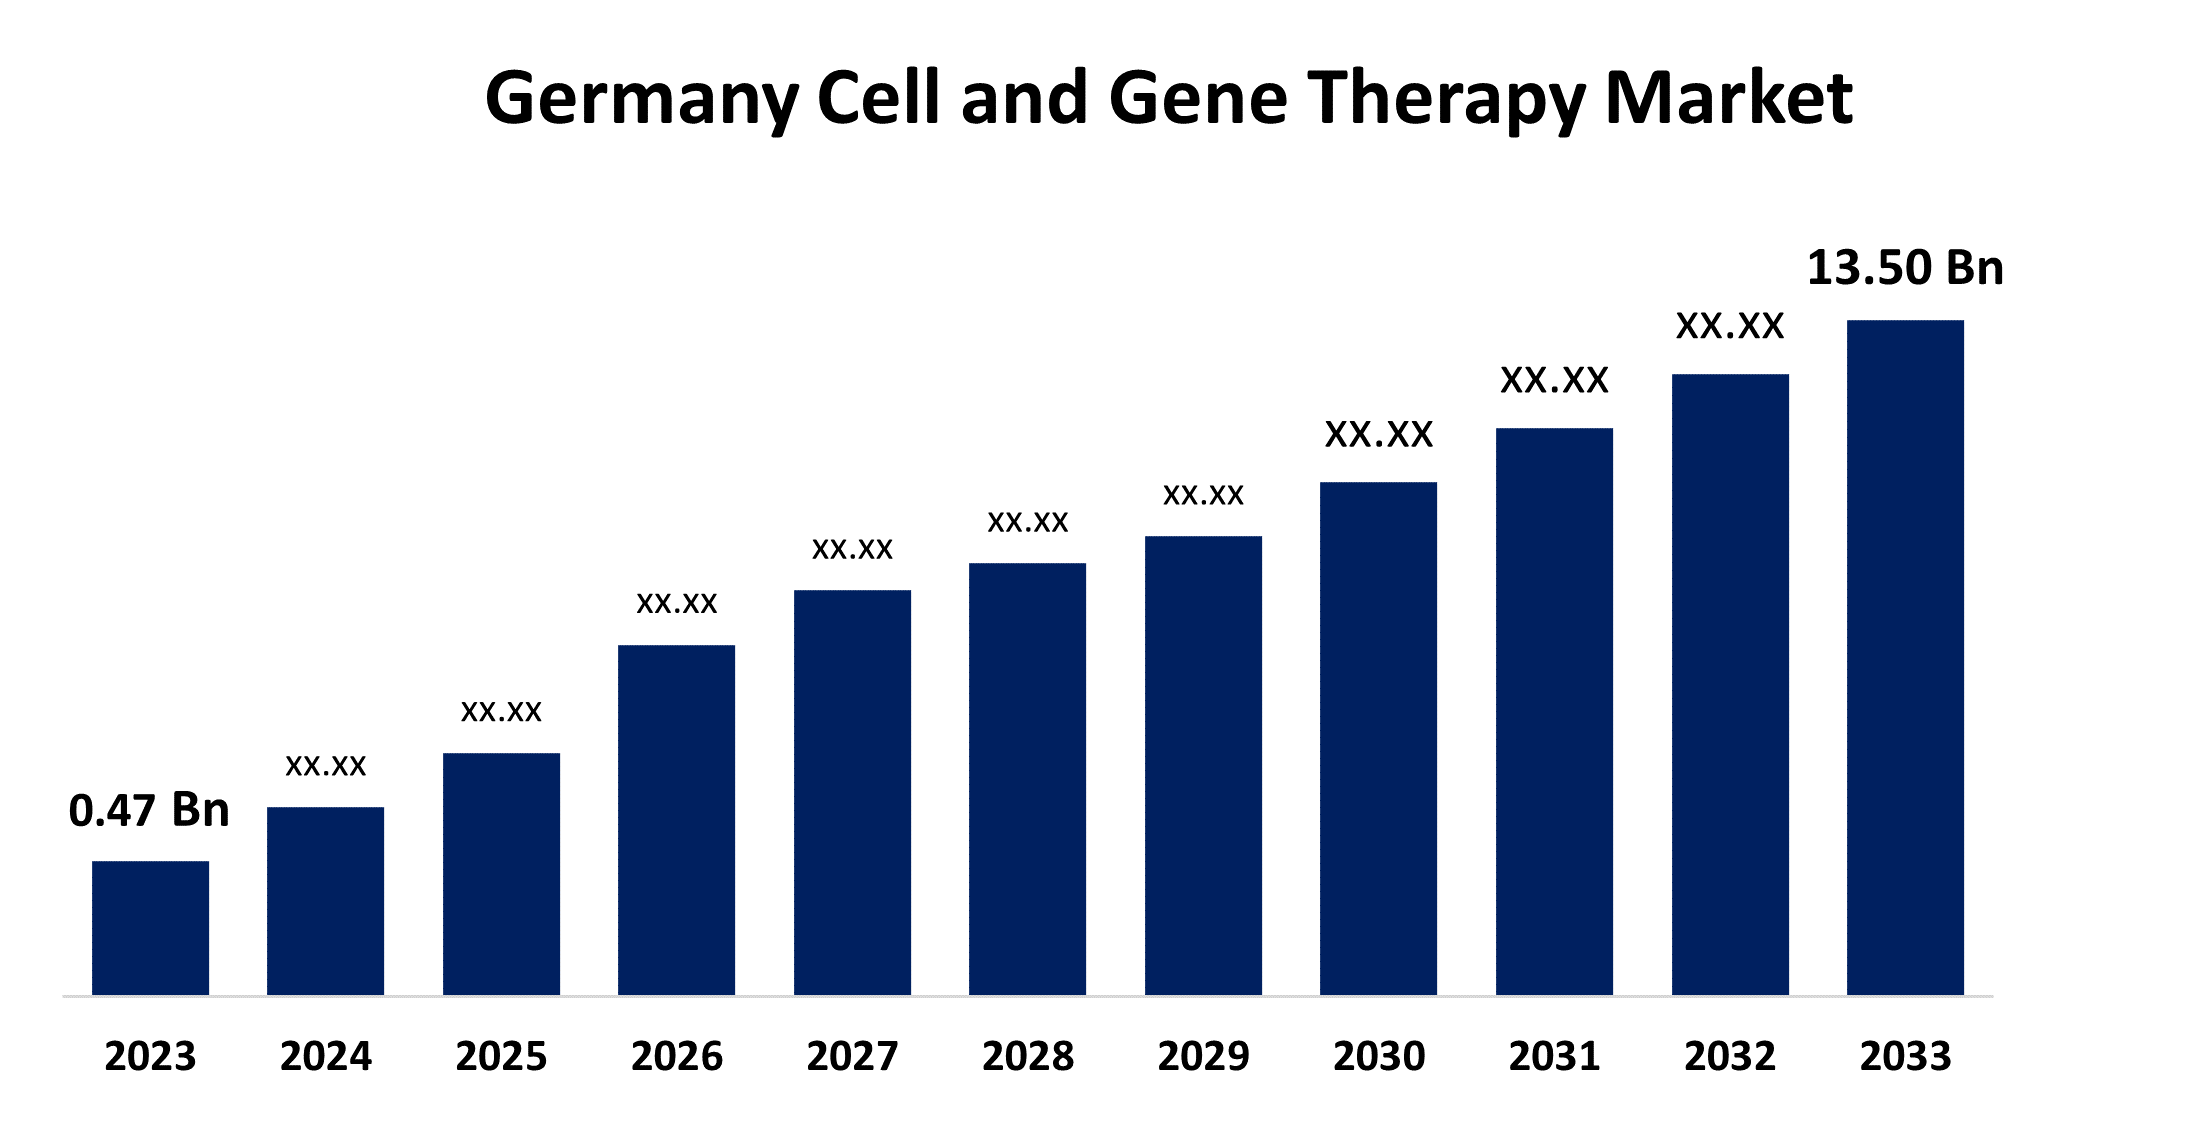 Germany Cell and Gene Therapy Market